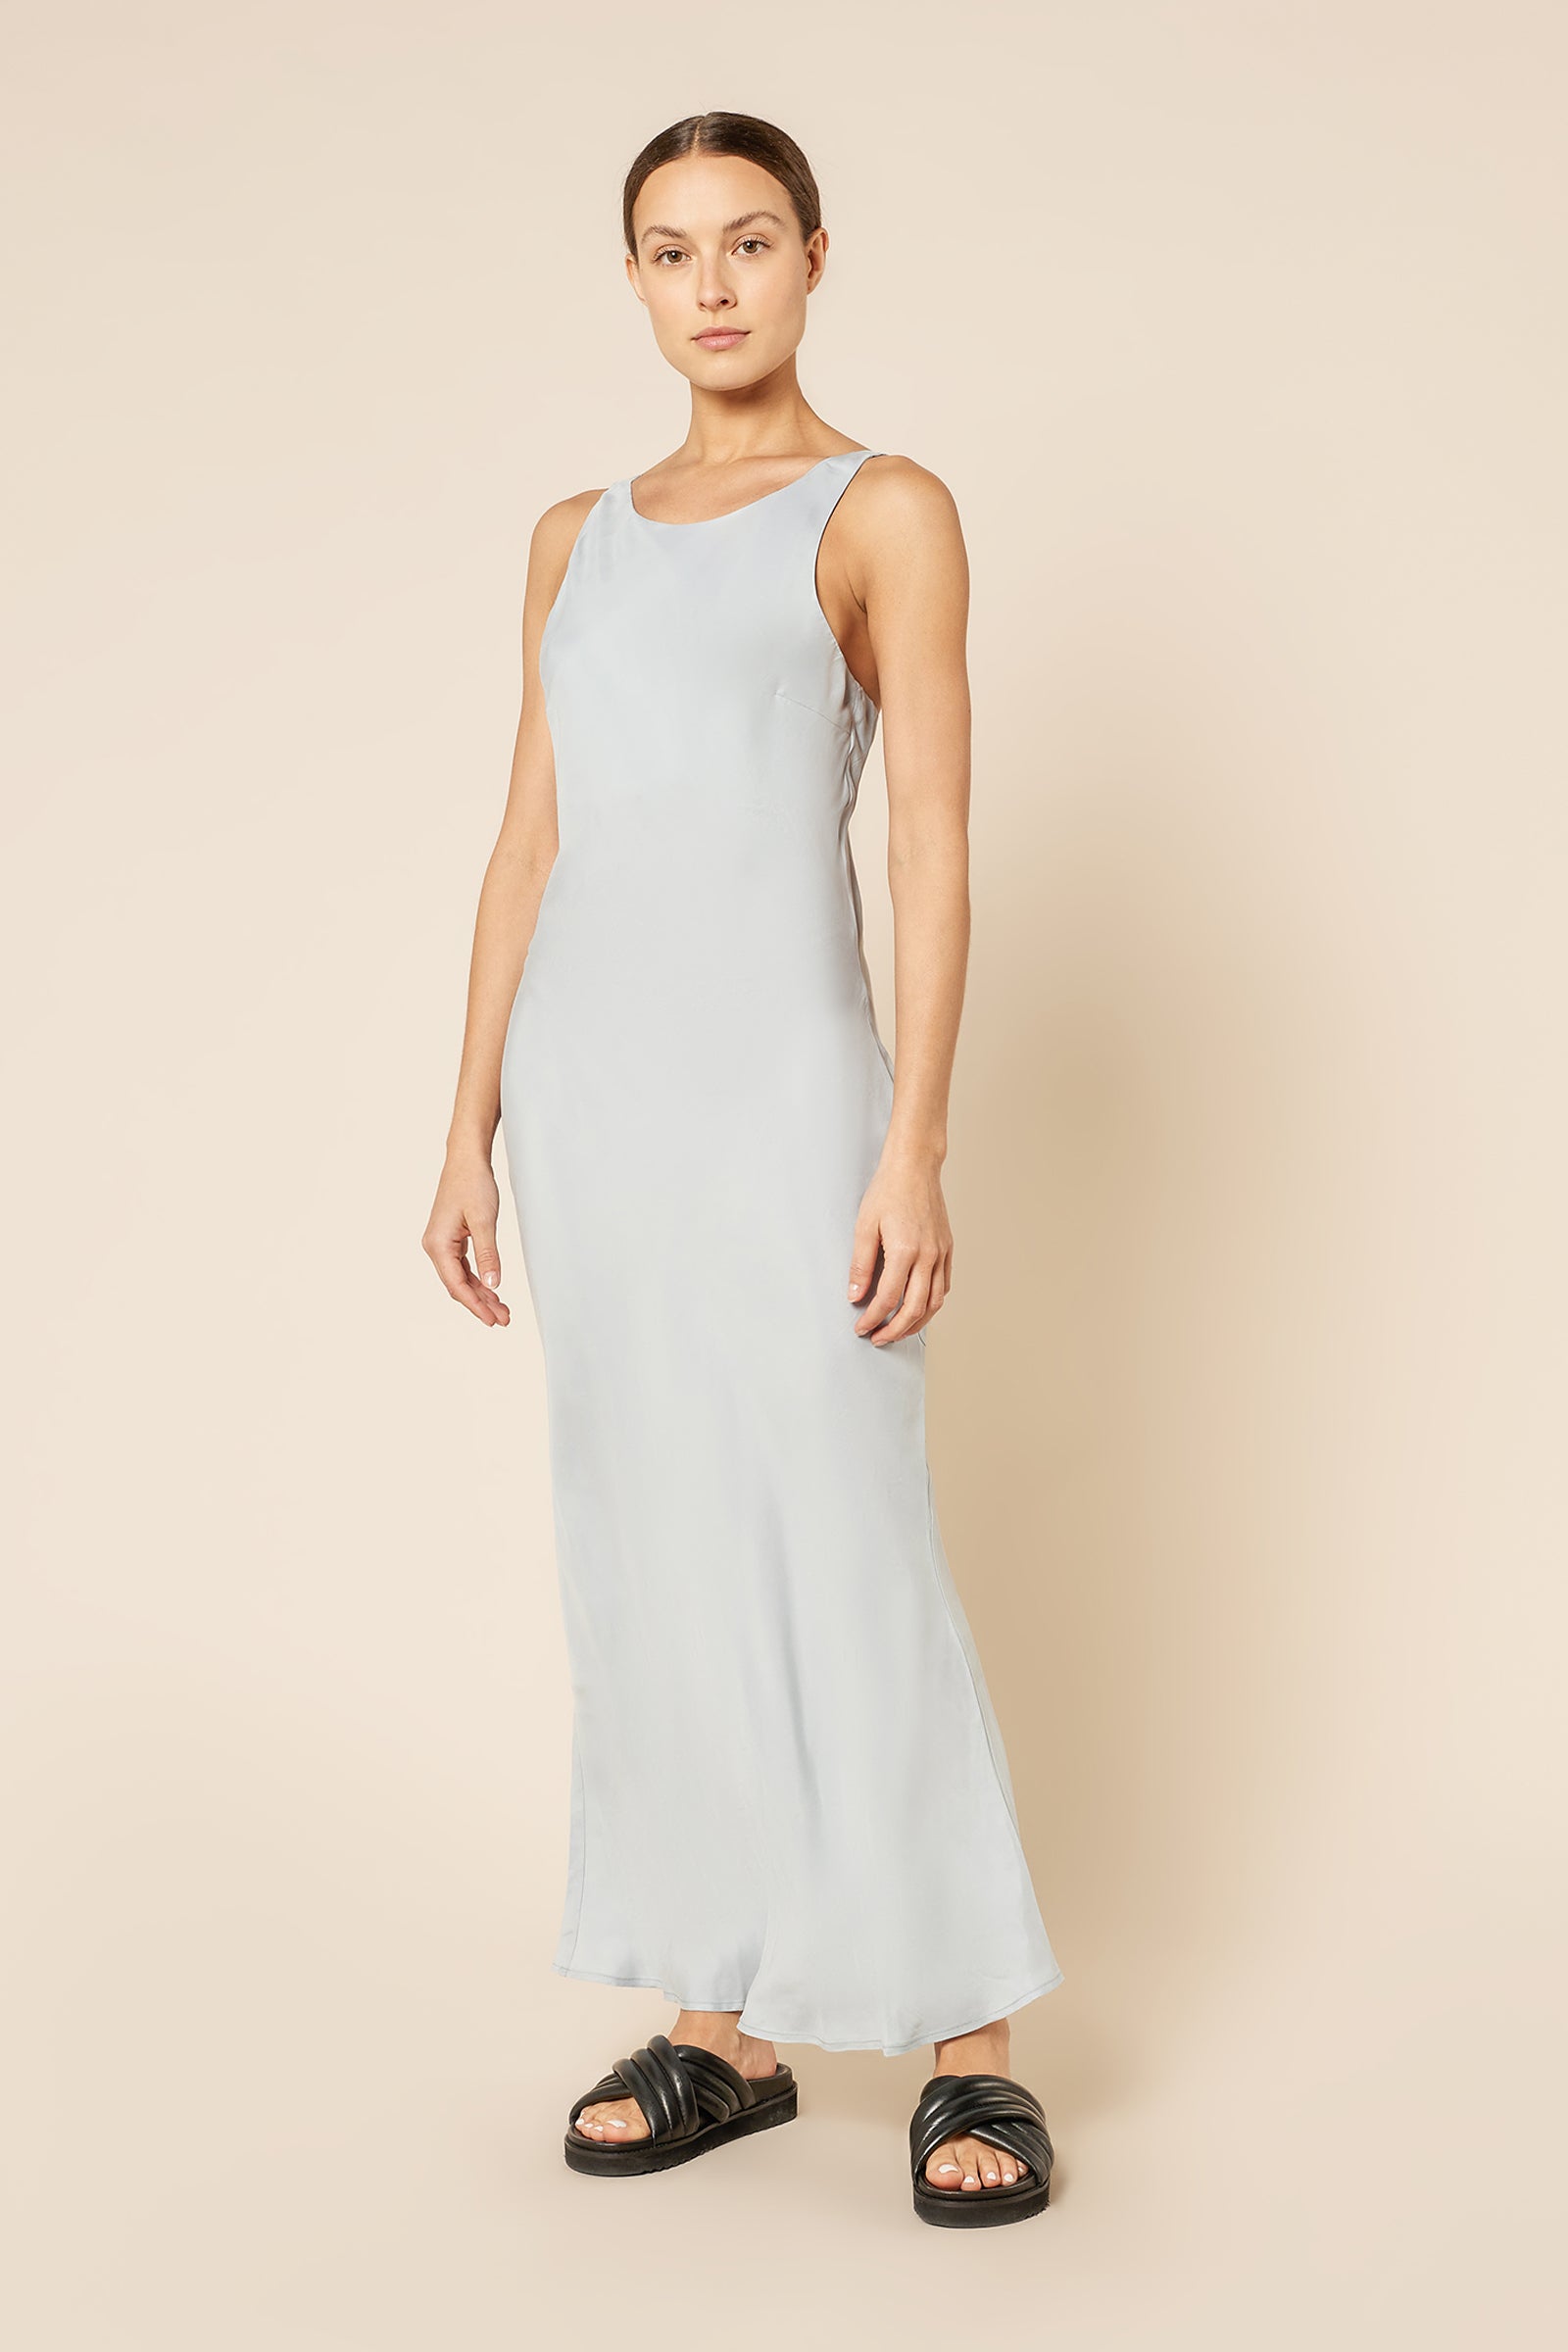 Nude Lucy Gia Cupro Dress in a Blue & Green Toned Bermuda Colour